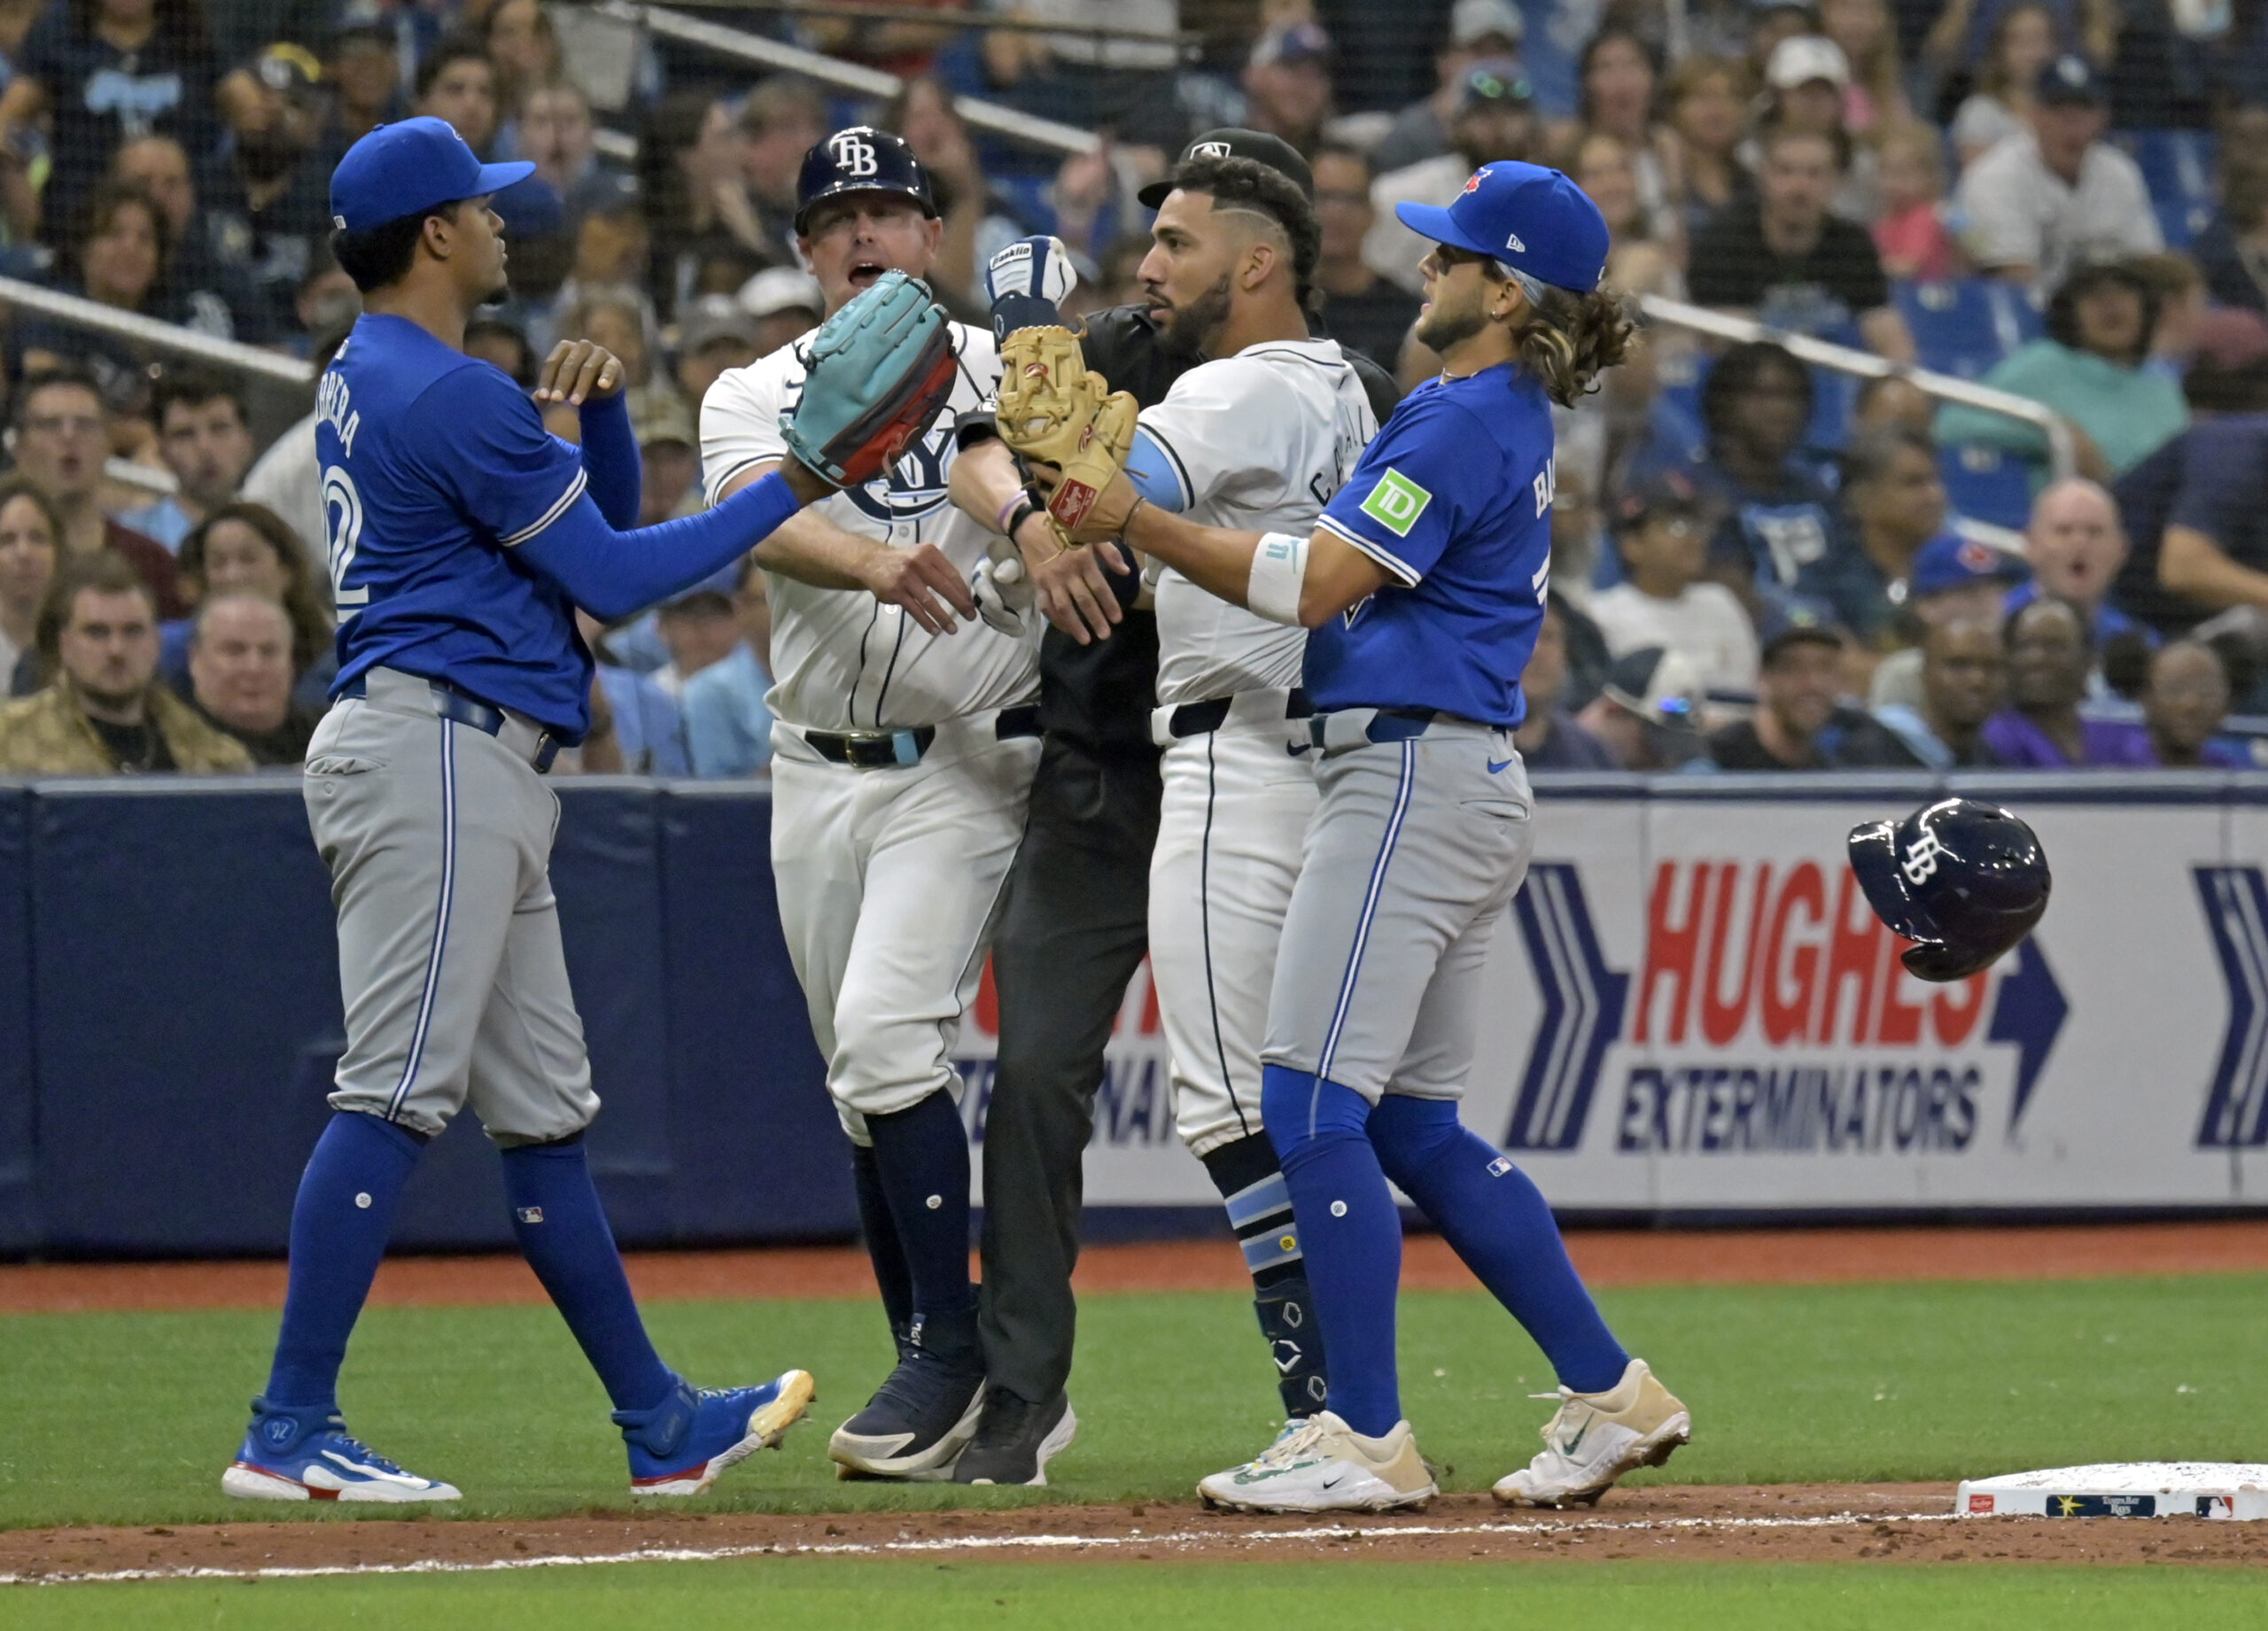 latinos-genesis-cabrera-and-jose-caballero-almost-hit-each-other-in-the-blue-jays-vs-rays